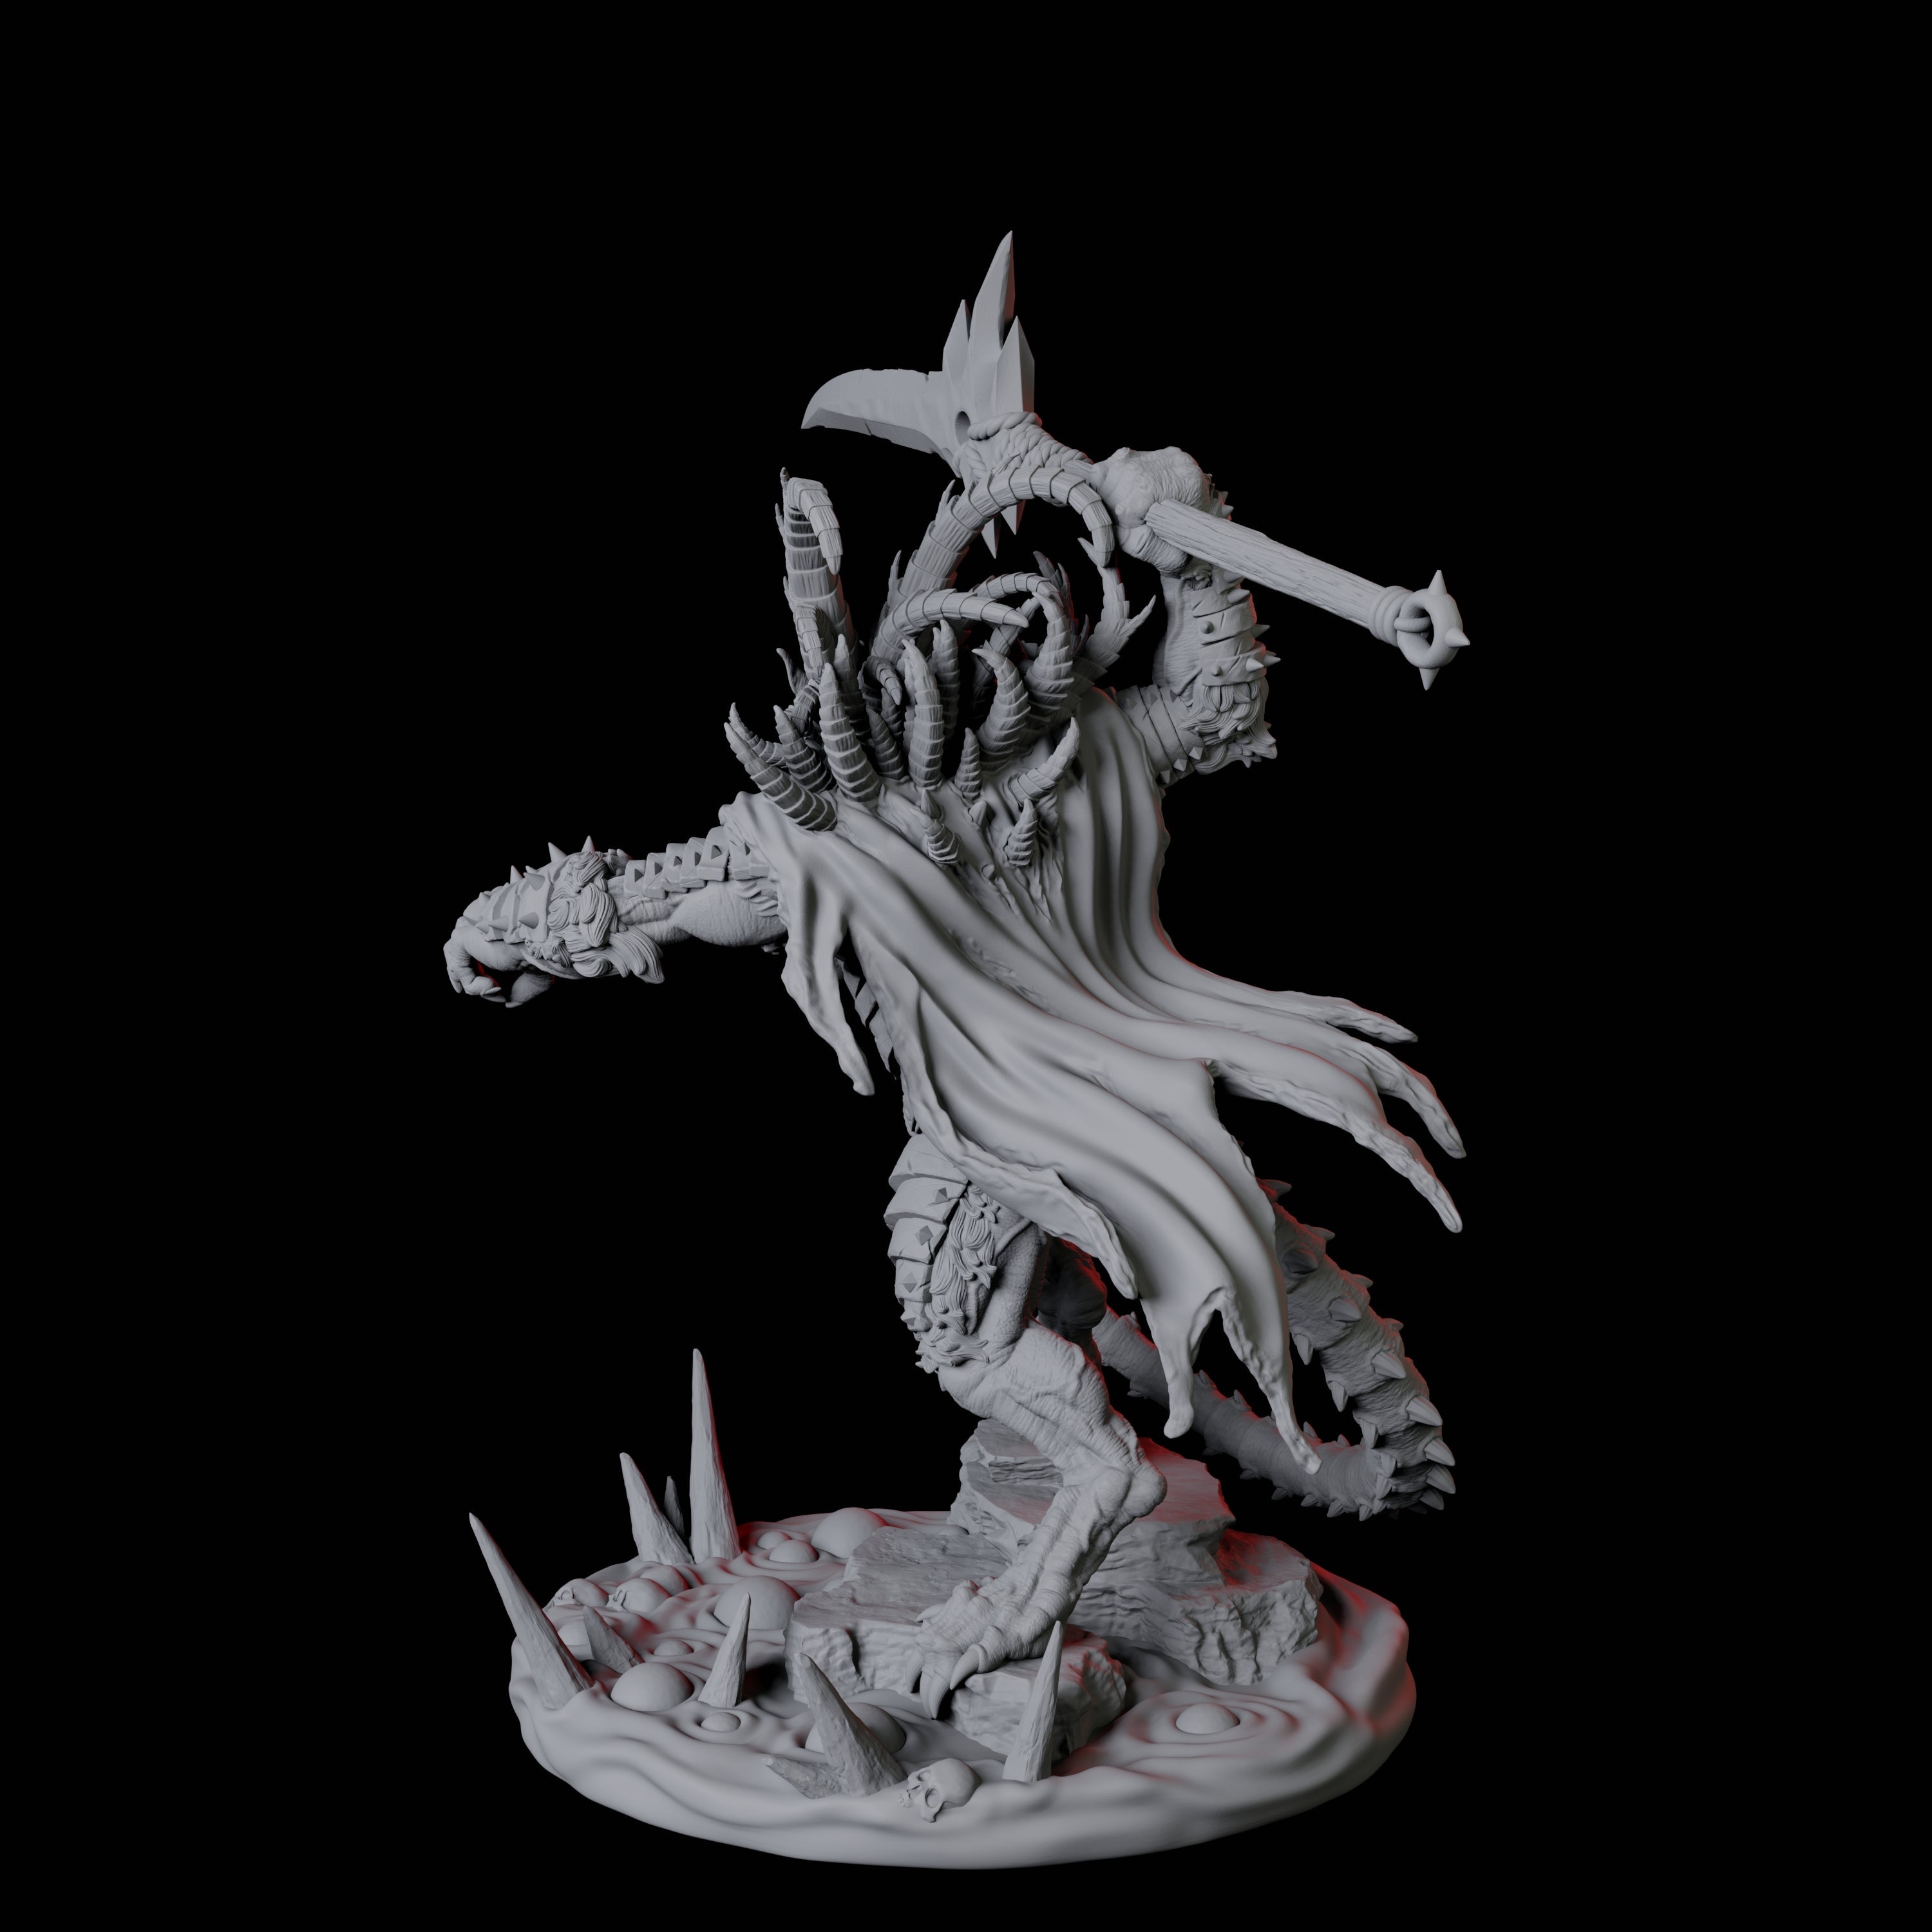 Ratfolk Filth Paladin C Miniature for Dungeons and Dragons, Pathfinder or other TTRPGs